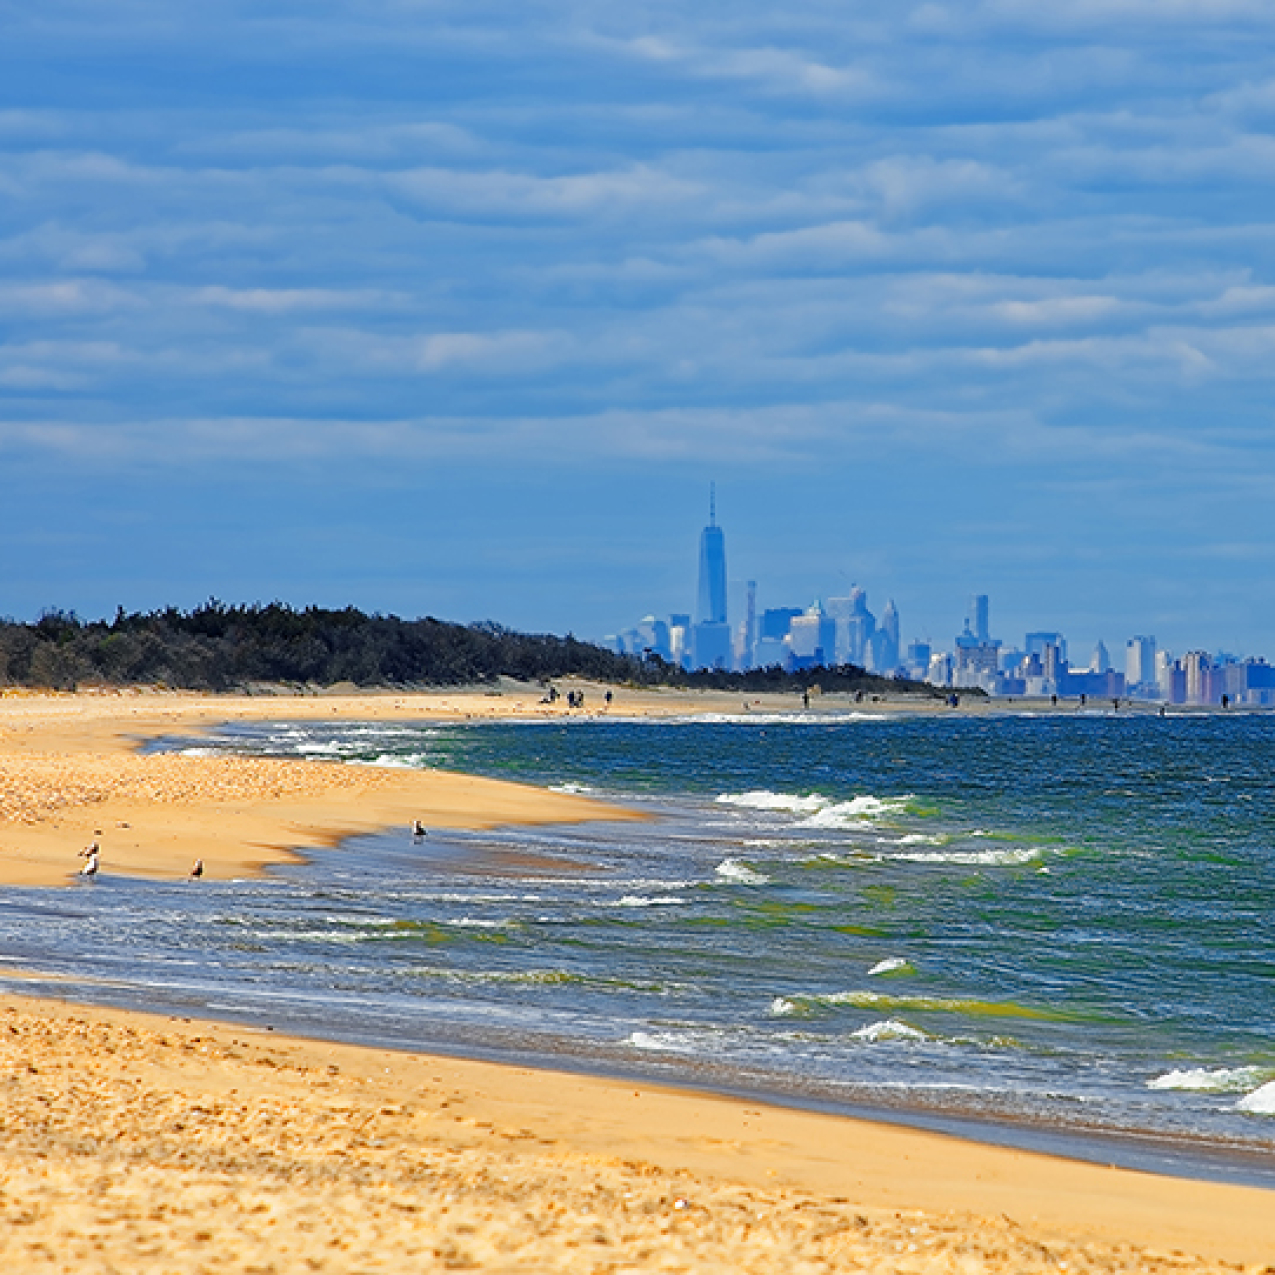 A coastal beach shoreline with a city and skyline in the background.